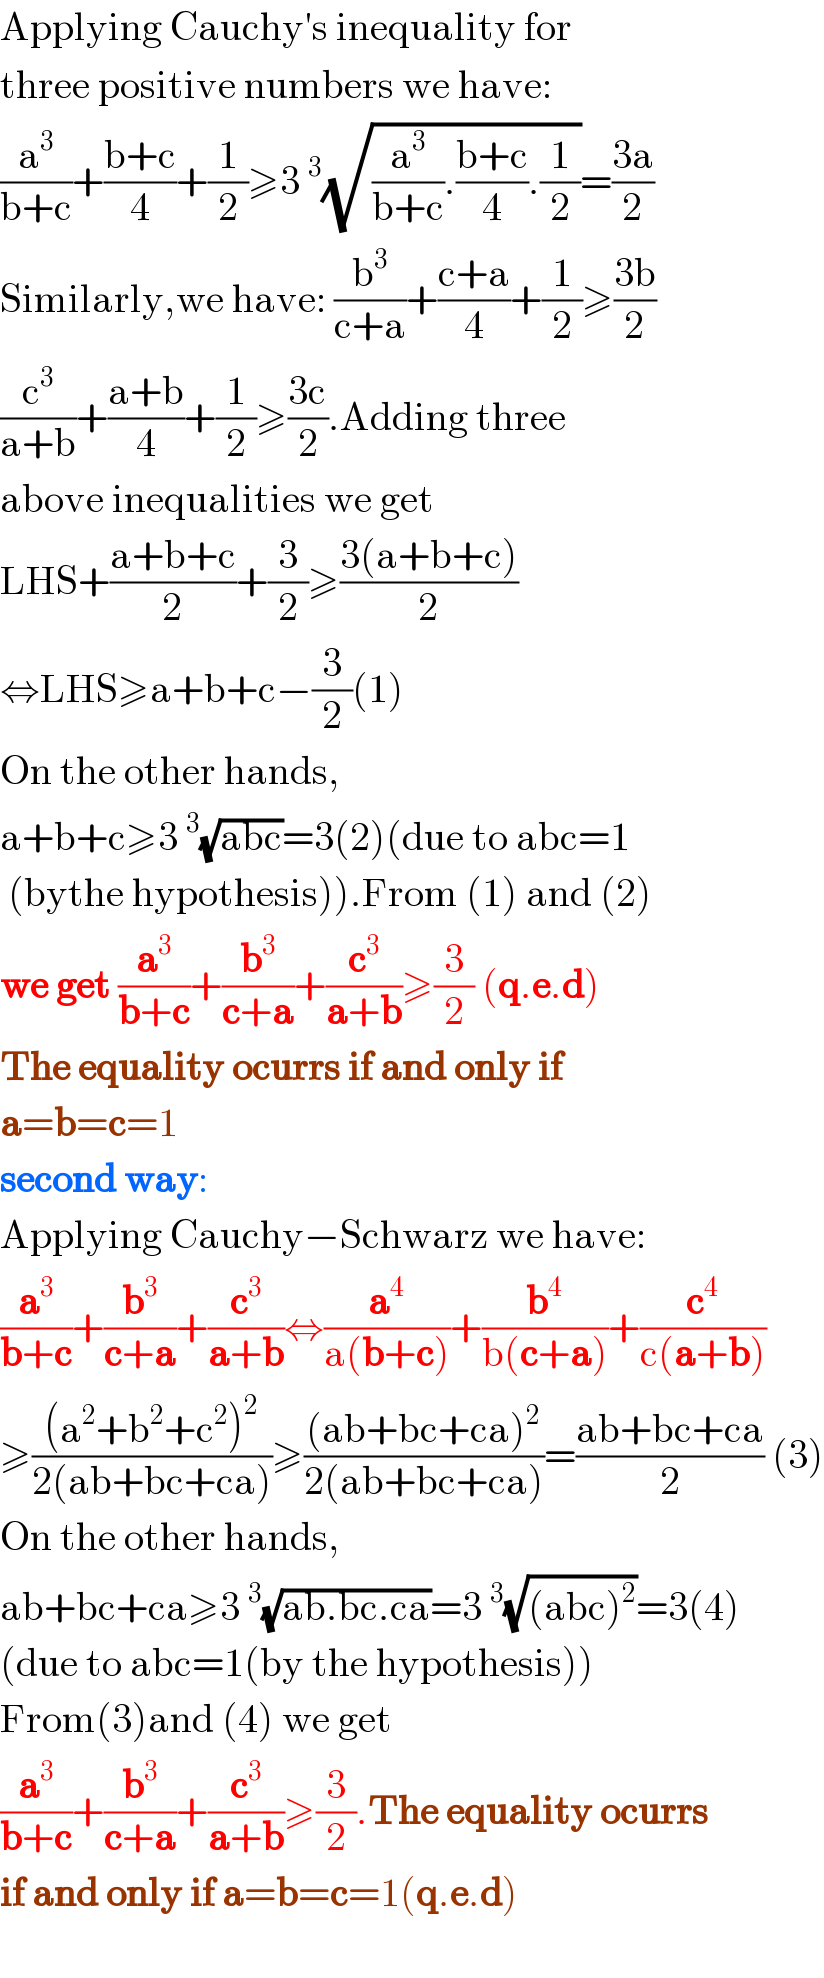 Applying Cauchy′s inequality for   three positive numbers we have:  (a^3 /(b+c))+((b+c)/4)+(1/2)≥3^3 (√((a^3 /(b+c)).((b+c)/4).(1/2)))=((3a)/2)  Similarly,we have: (b^3 /(c+a))+((c+a)/4)+(1/2)≥((3b)/2)  (c^3 /(a+b))+((a+b)/4)+(1/2)≥((3c)/2).Adding three  above inequalities we get  LHS+((a+b+c)/2)+(3/2)≥((3(a+b+c))/2)  ⇔LHS≥a+b+c−(3/2)(1)  On the other hands,  a+b+c≥3^3 (√(abc))=3(2)(due to abc=1   (bythe hypothesis)).From (1) and (2)  we get (a^3 /(b+c))+(b^3 /(c+a))+(c^3 /(a+b))≥(3/2) (q.e.d)  The equality ocurrs if and only if  a=b=c=1  second way:  Applying Cauchy−Schwarz we have:  (a^3 /(b+c))+(b^3 /(c+a))+(c^3 /(a+b))⇔(a^4 /(a(b+c)))+(b^4 /(b(c+a)))+(c^4 /(c(a+b)))  ≥(((a^2 +b^2 +c^2 )^2 )/(2(ab+bc+ca)))≥(((ab+bc+ca)^2 )/(2(ab+bc+ca)))=((ab+bc+ca)/2) (3)  On the other hands,  ab+bc+ca≥3^3 (√(ab.bc.ca))=3^3 (√((abc)^2 ))=3(4)  (due to abc=1(by the hypothesis))  From(3)and (4) we get  (a^3 /(b+c))+(b^3 /(c+a))+(c^3 /(a+b))≥(3/2).The equality ocurrs  if and only if a=b=c=1(q.e.d)    